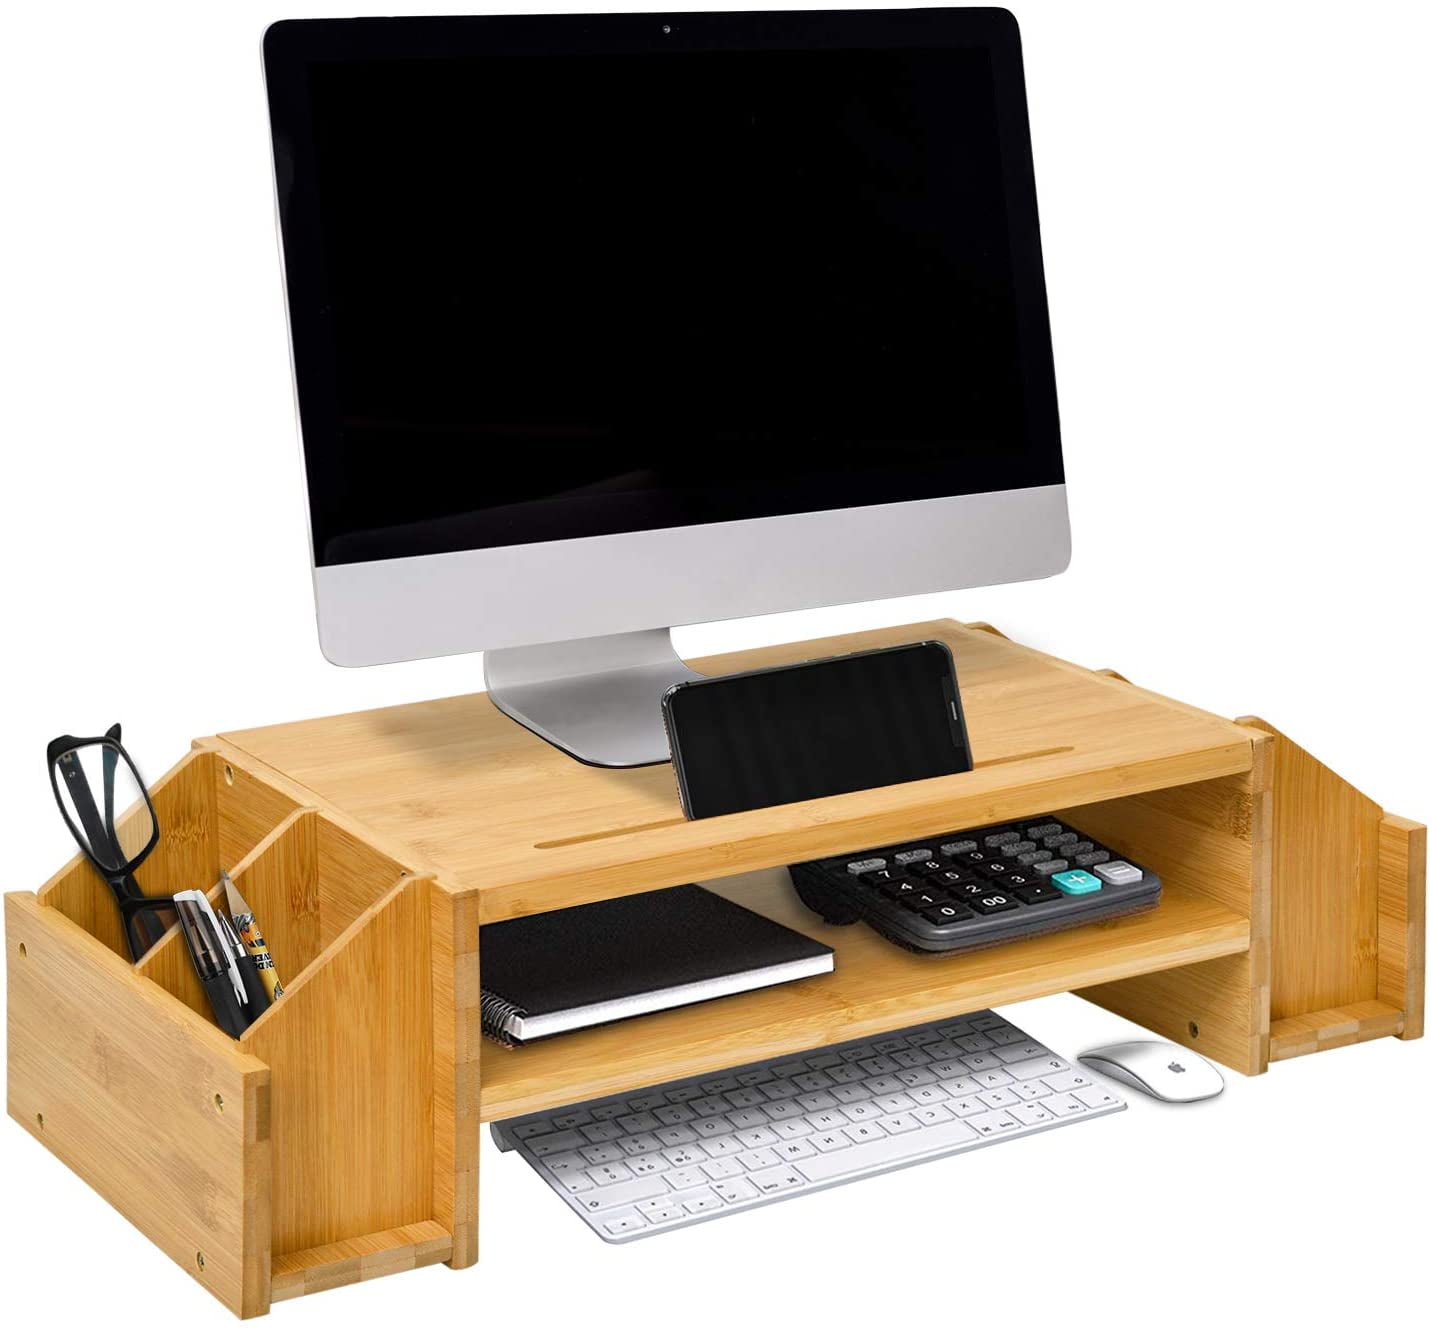 Waytrim Bamboo Monitor Stand Wood, Wooden Desktop Printer Stand With Drawers